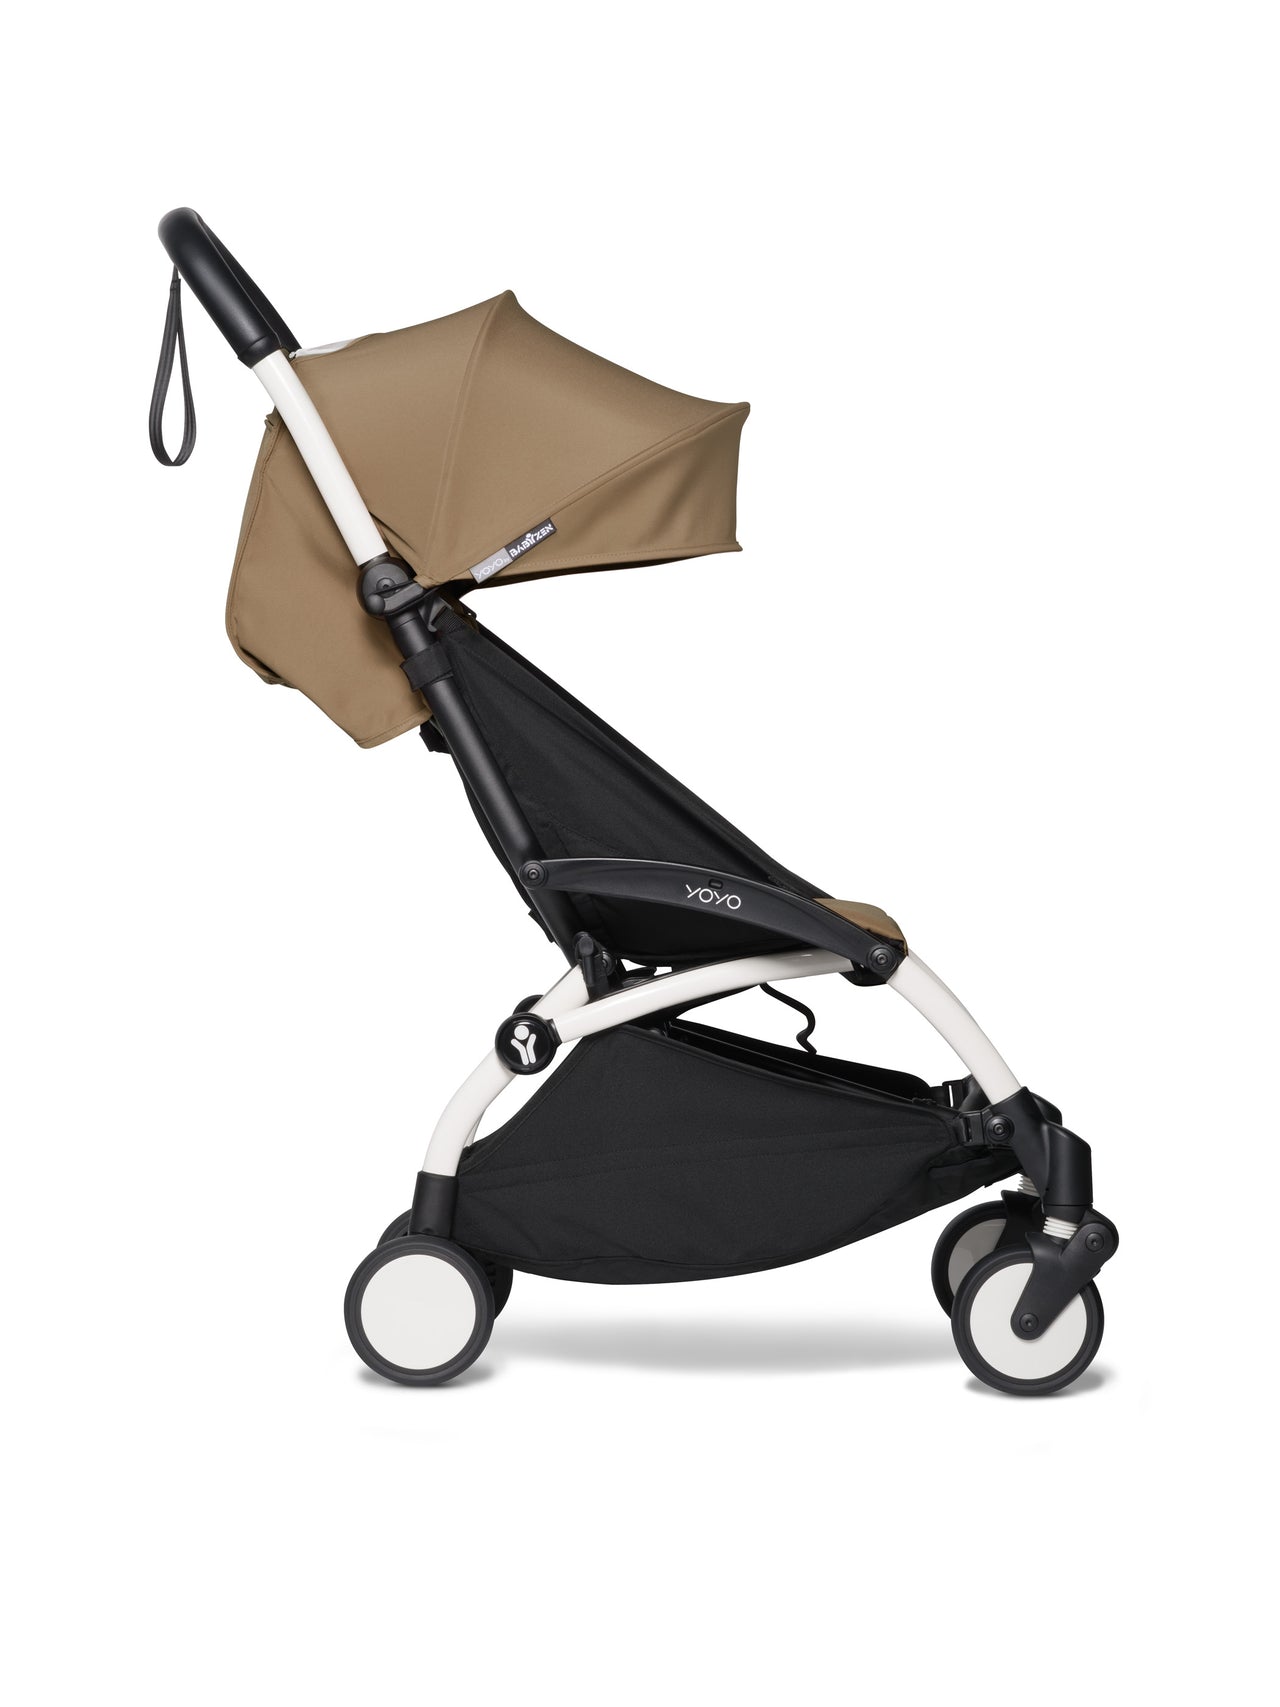 BABYZEN YOYO² 6+ Stroller (White Frame)- Toffee with FREE BACKPACK!